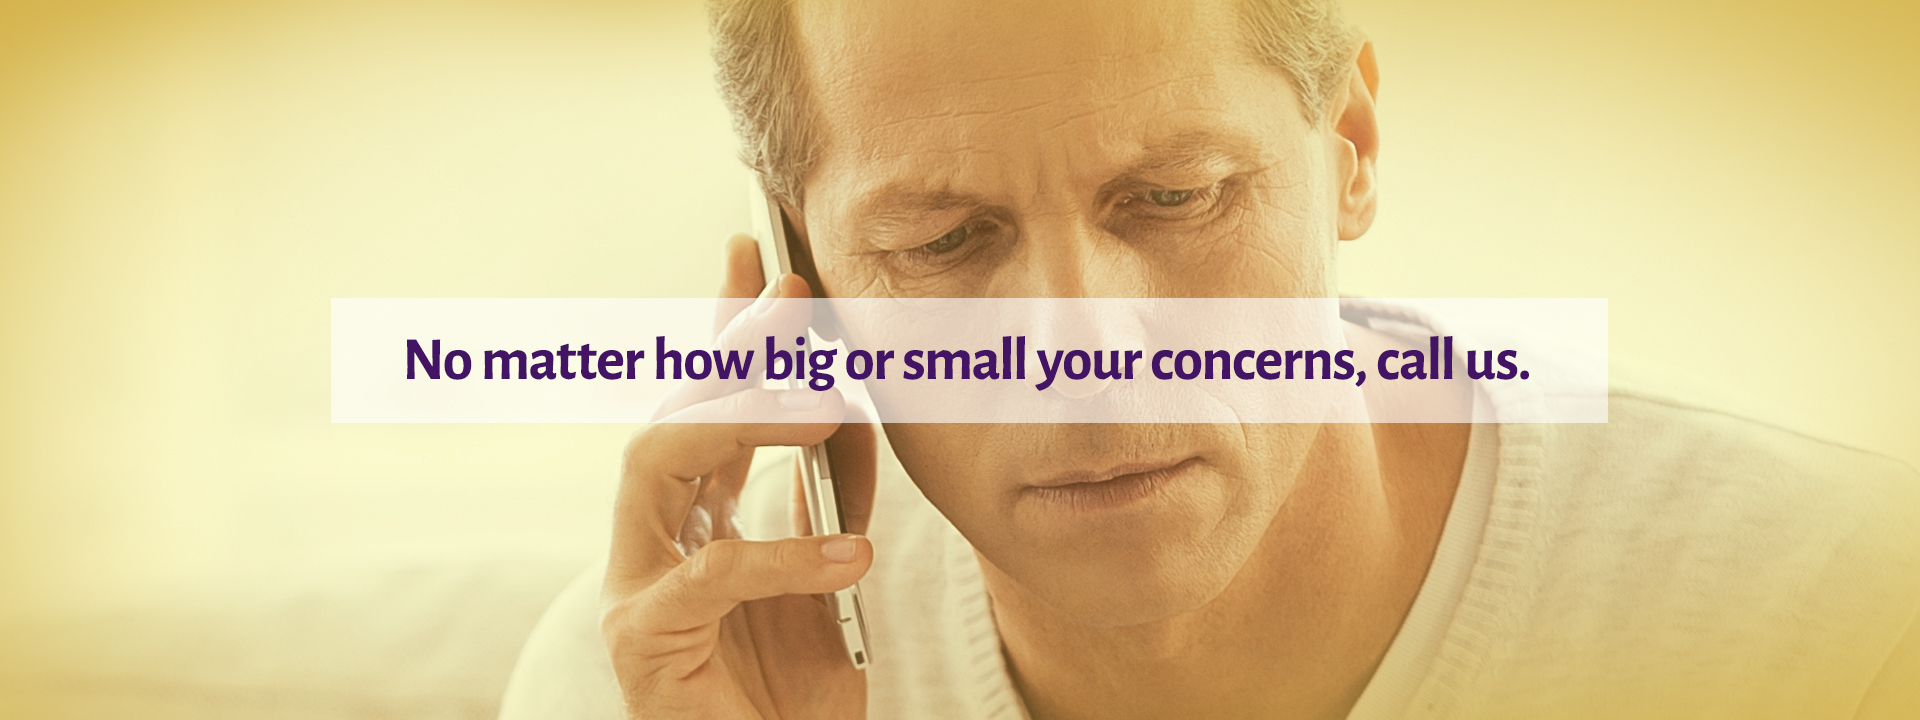 We encourage you to call us no matter how big or small your concerns are.